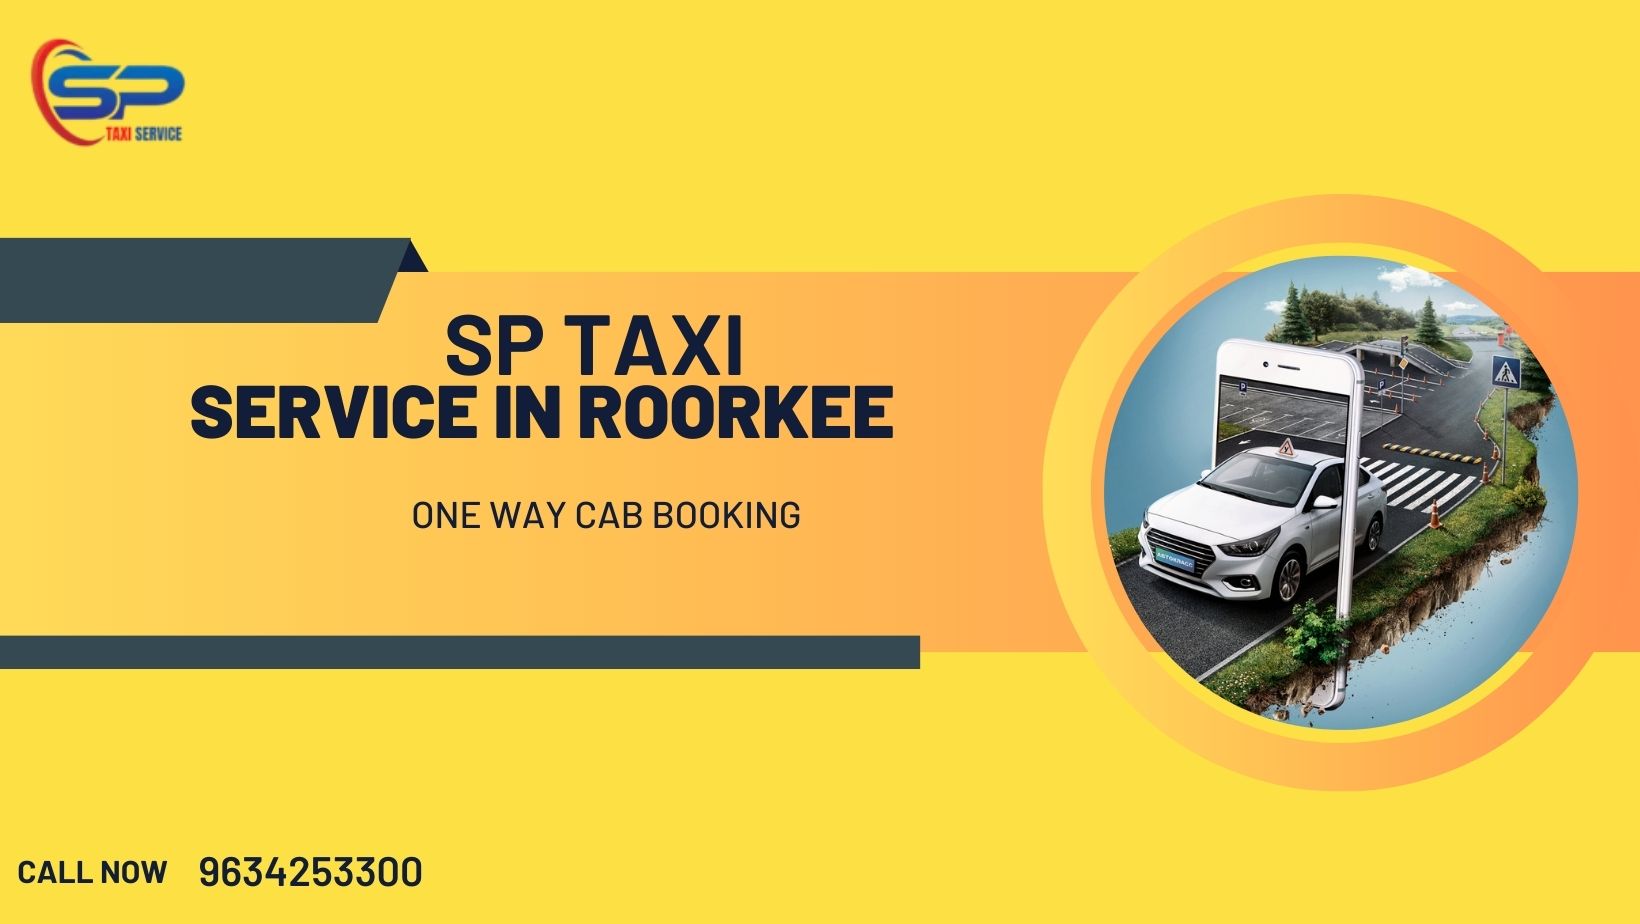 Roorkee Taxi service